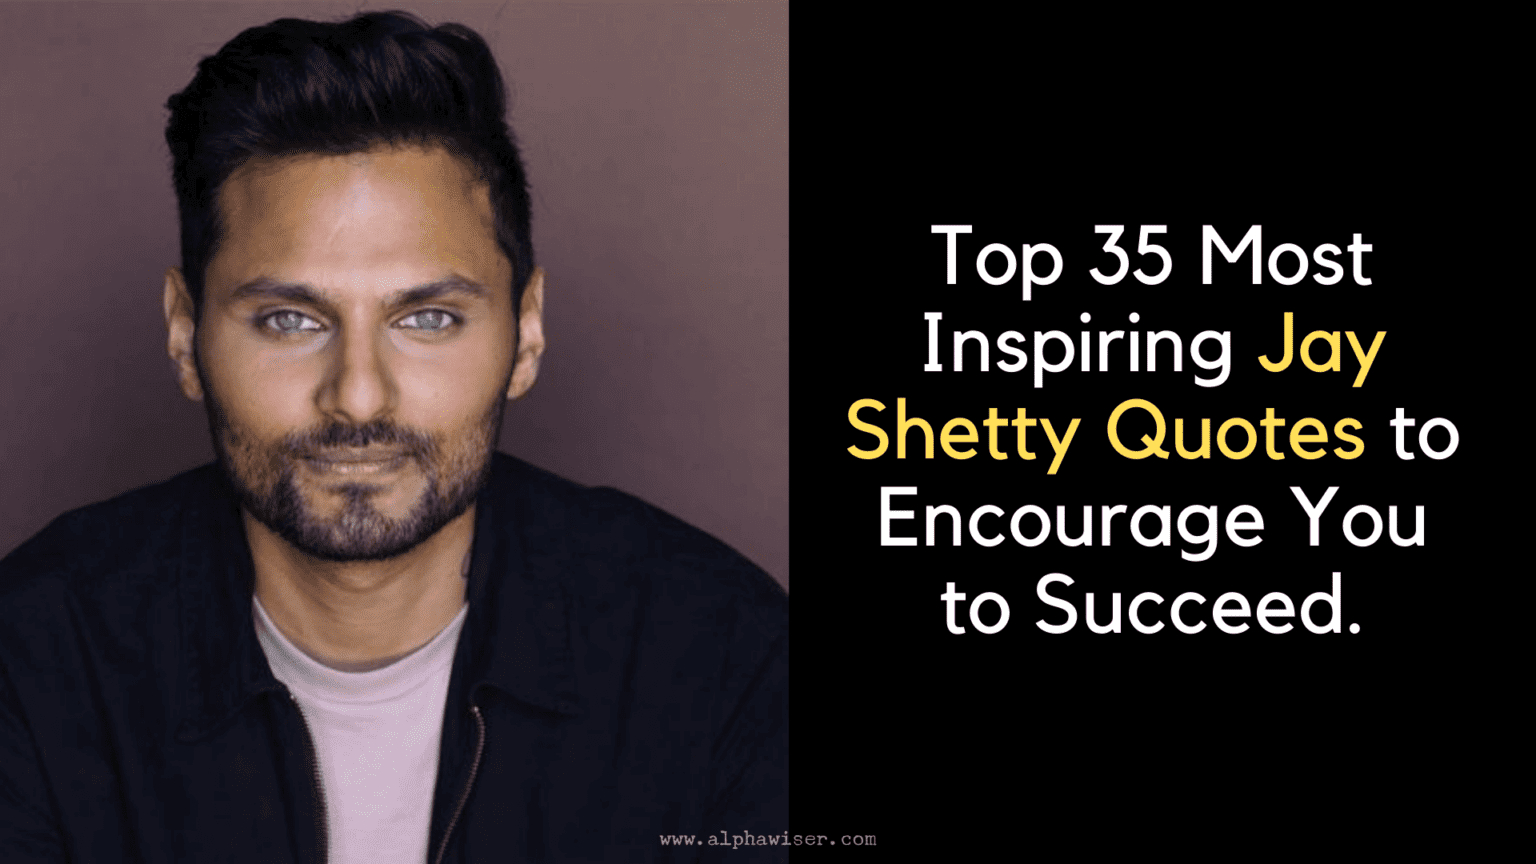 Top 35 Most Inspiring Jay Shetty Quotes to Encourage You to Succeed